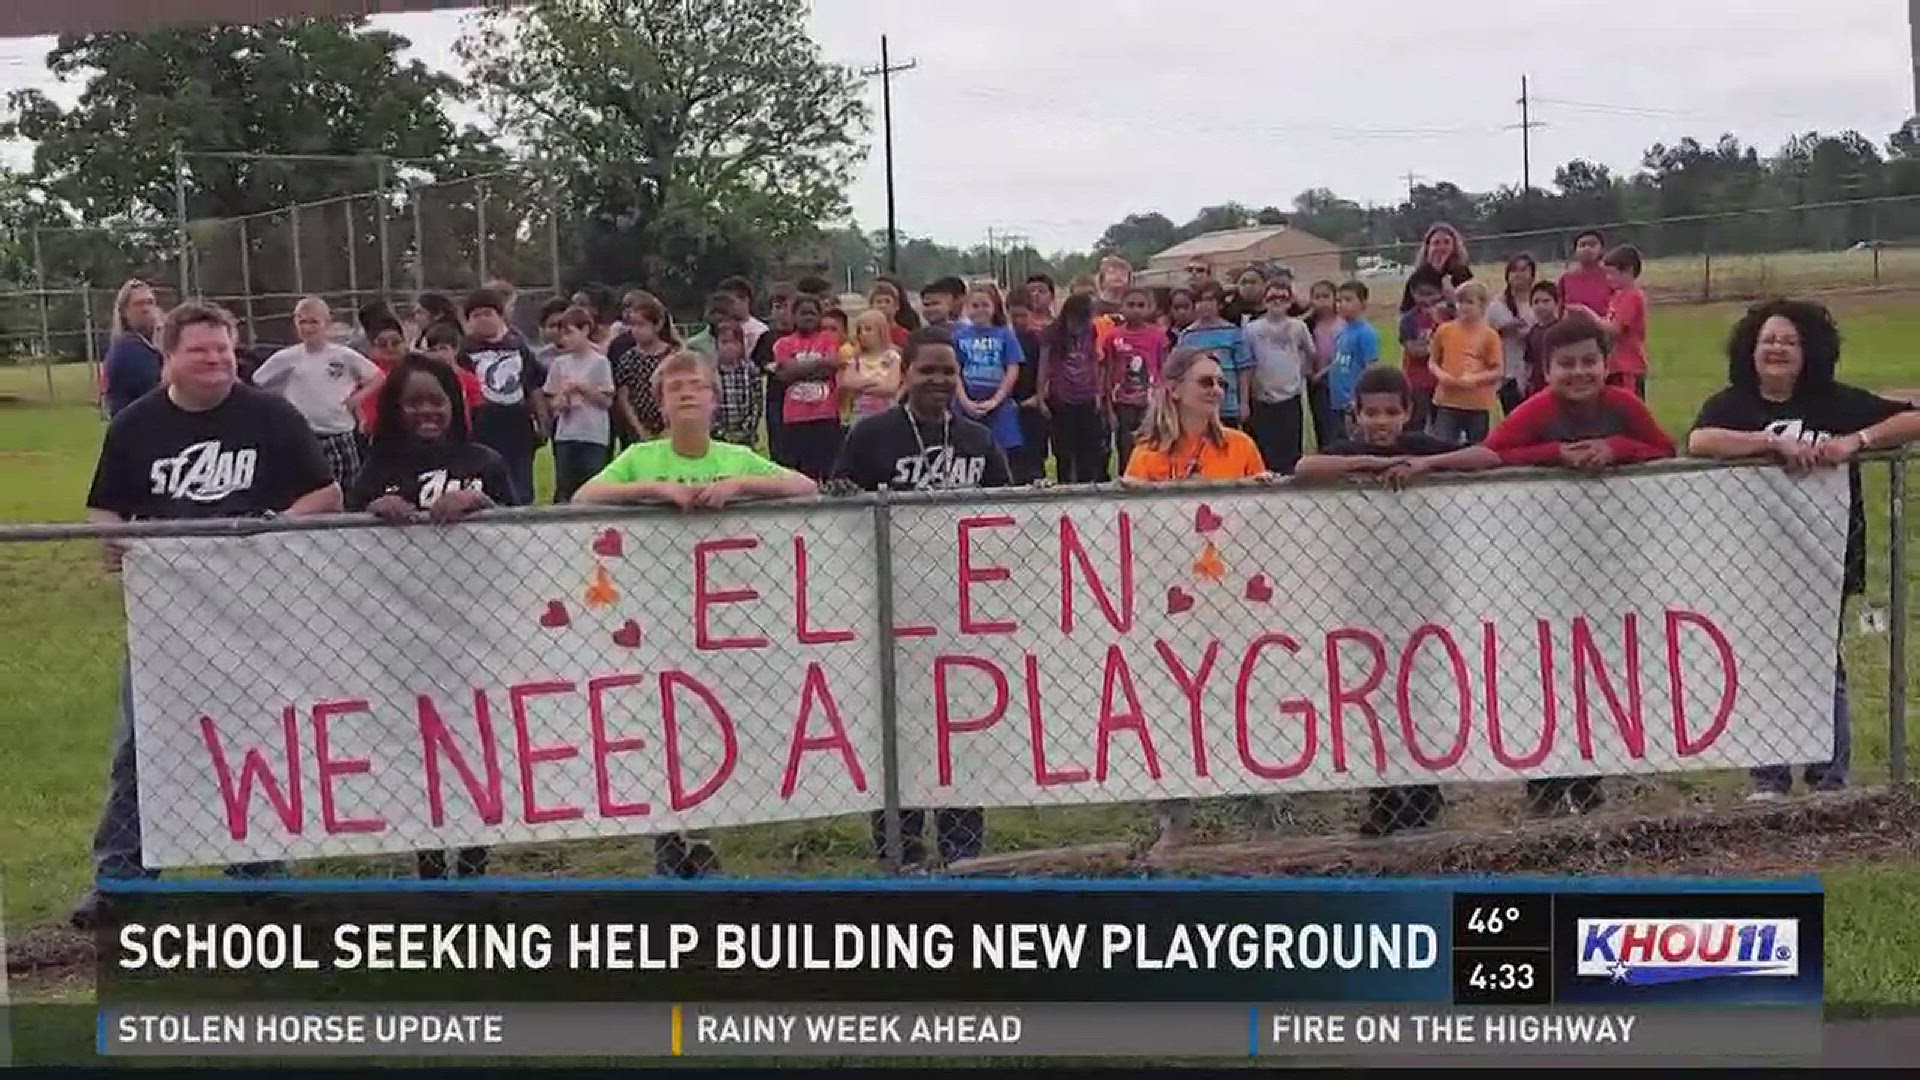 Goodrich Elementary School is asking for donations to help build a new playground for its students.